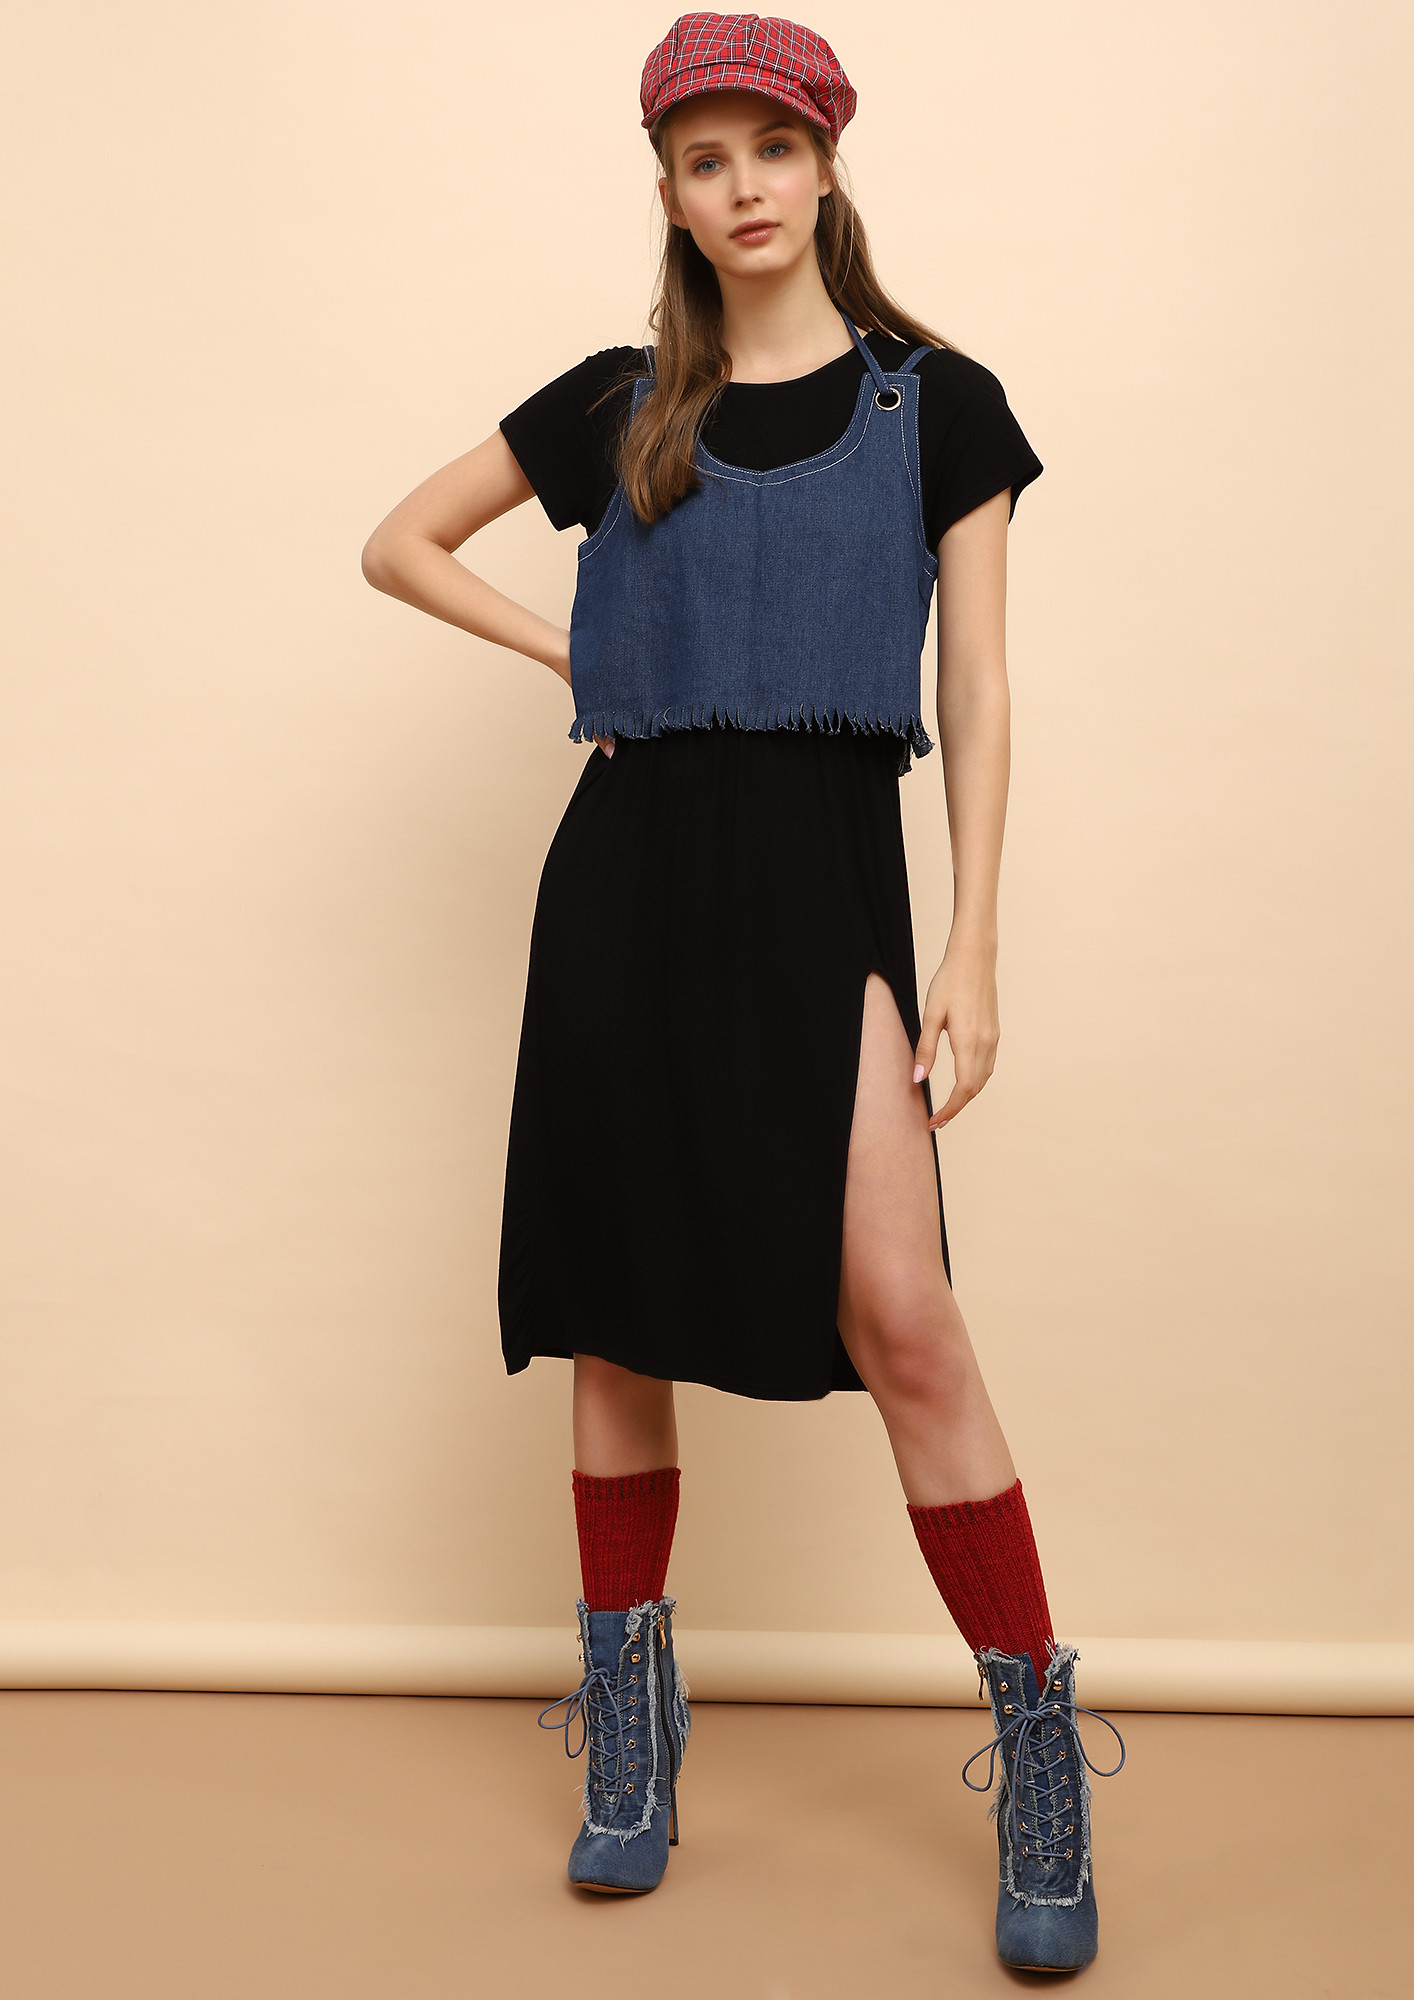 EAST TO WEST DUAL DRESS